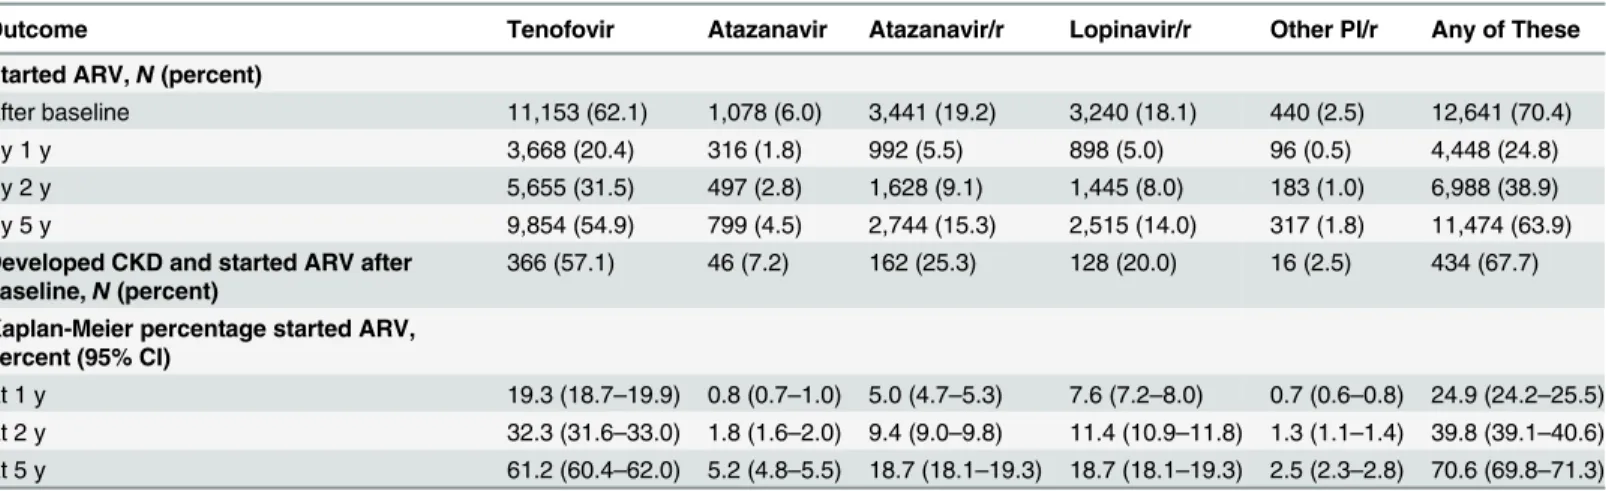 Table 4. Use of potentially nephrotoxic antiretrovirals during follow-up in among 17,954 individuals in the D:A:D study.